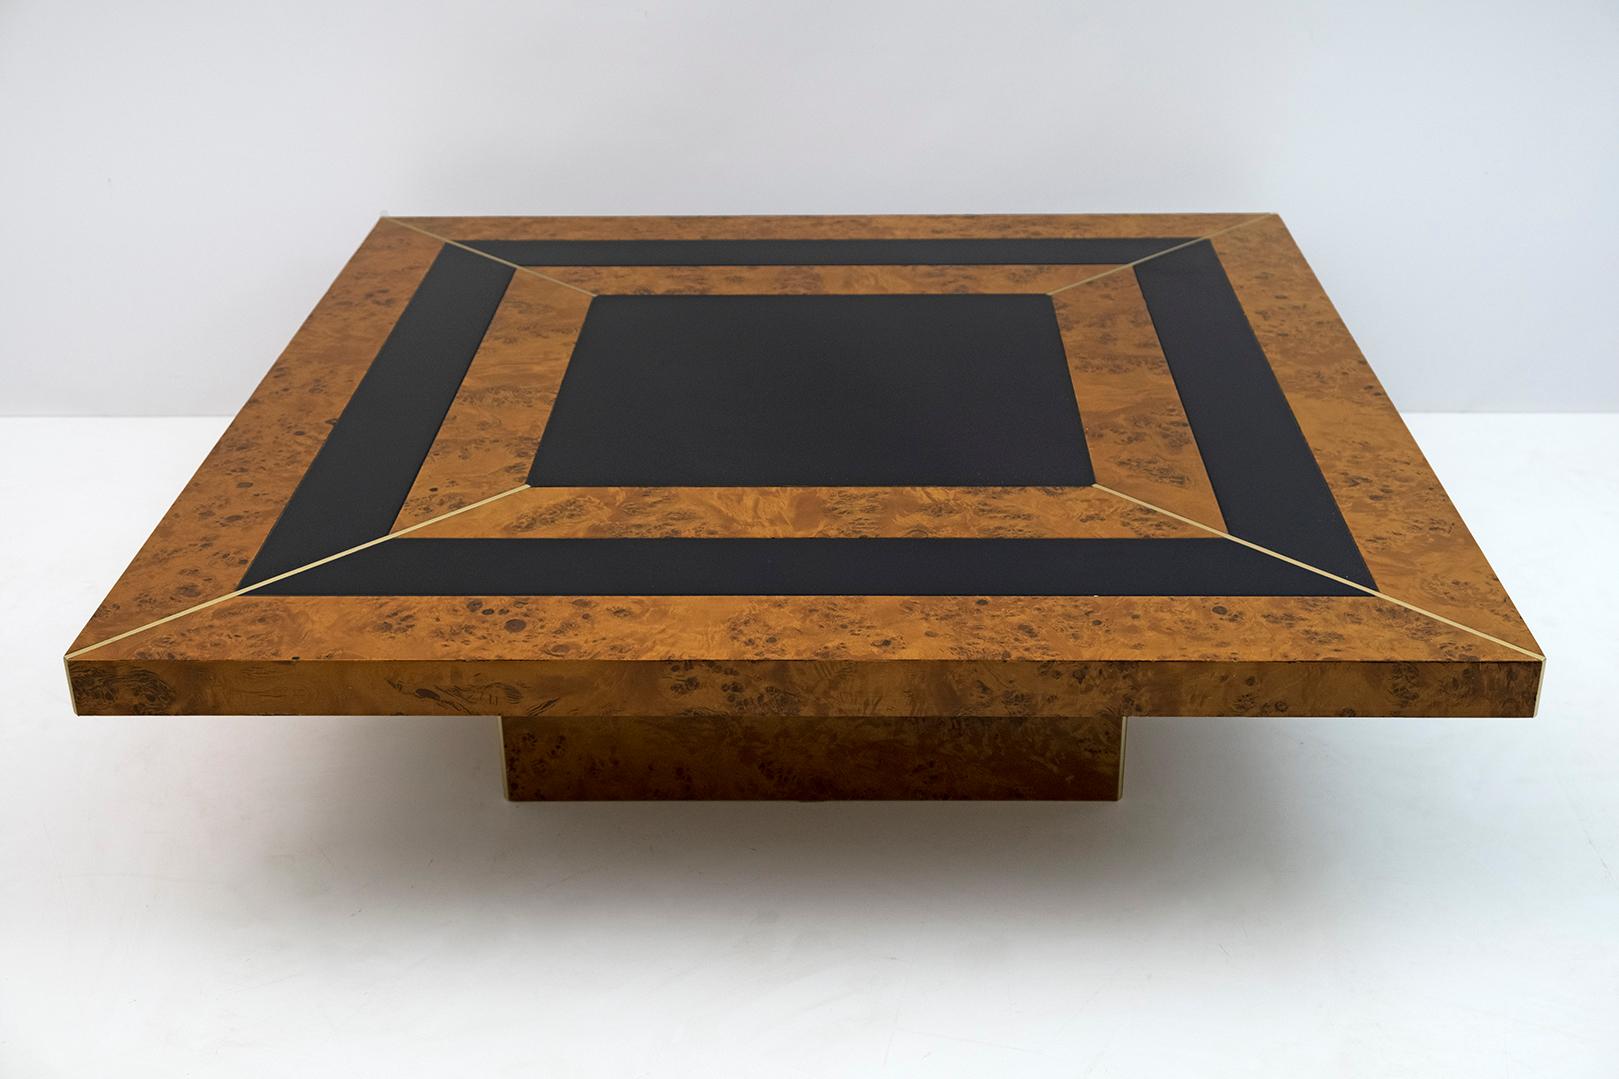 Art Deco Art Déco Style Italian Walnut and Lacquer Coffee Table, 1970s For Sale